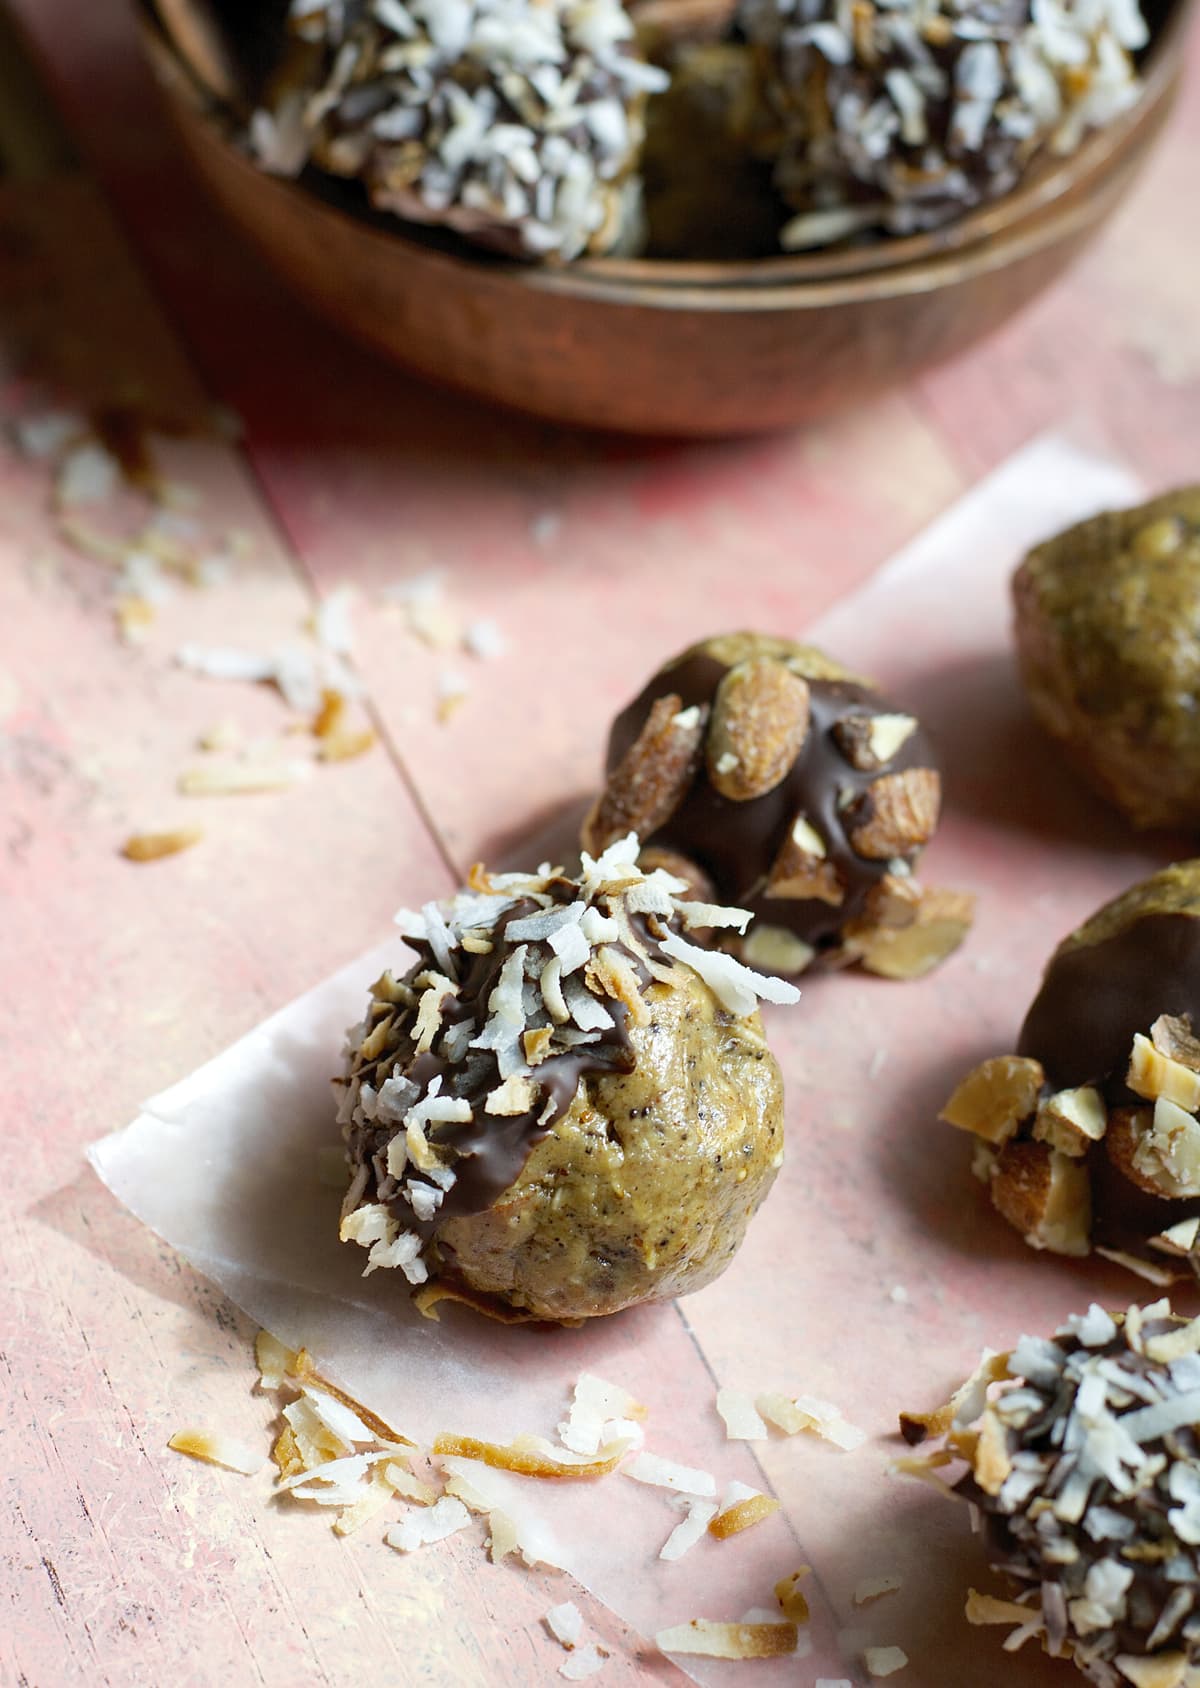 Coconut Mocha Almond Butter Espresso Balls are packed with oats, almonds, coffee and toasted coconut! The perfect snack for a little pick me up!